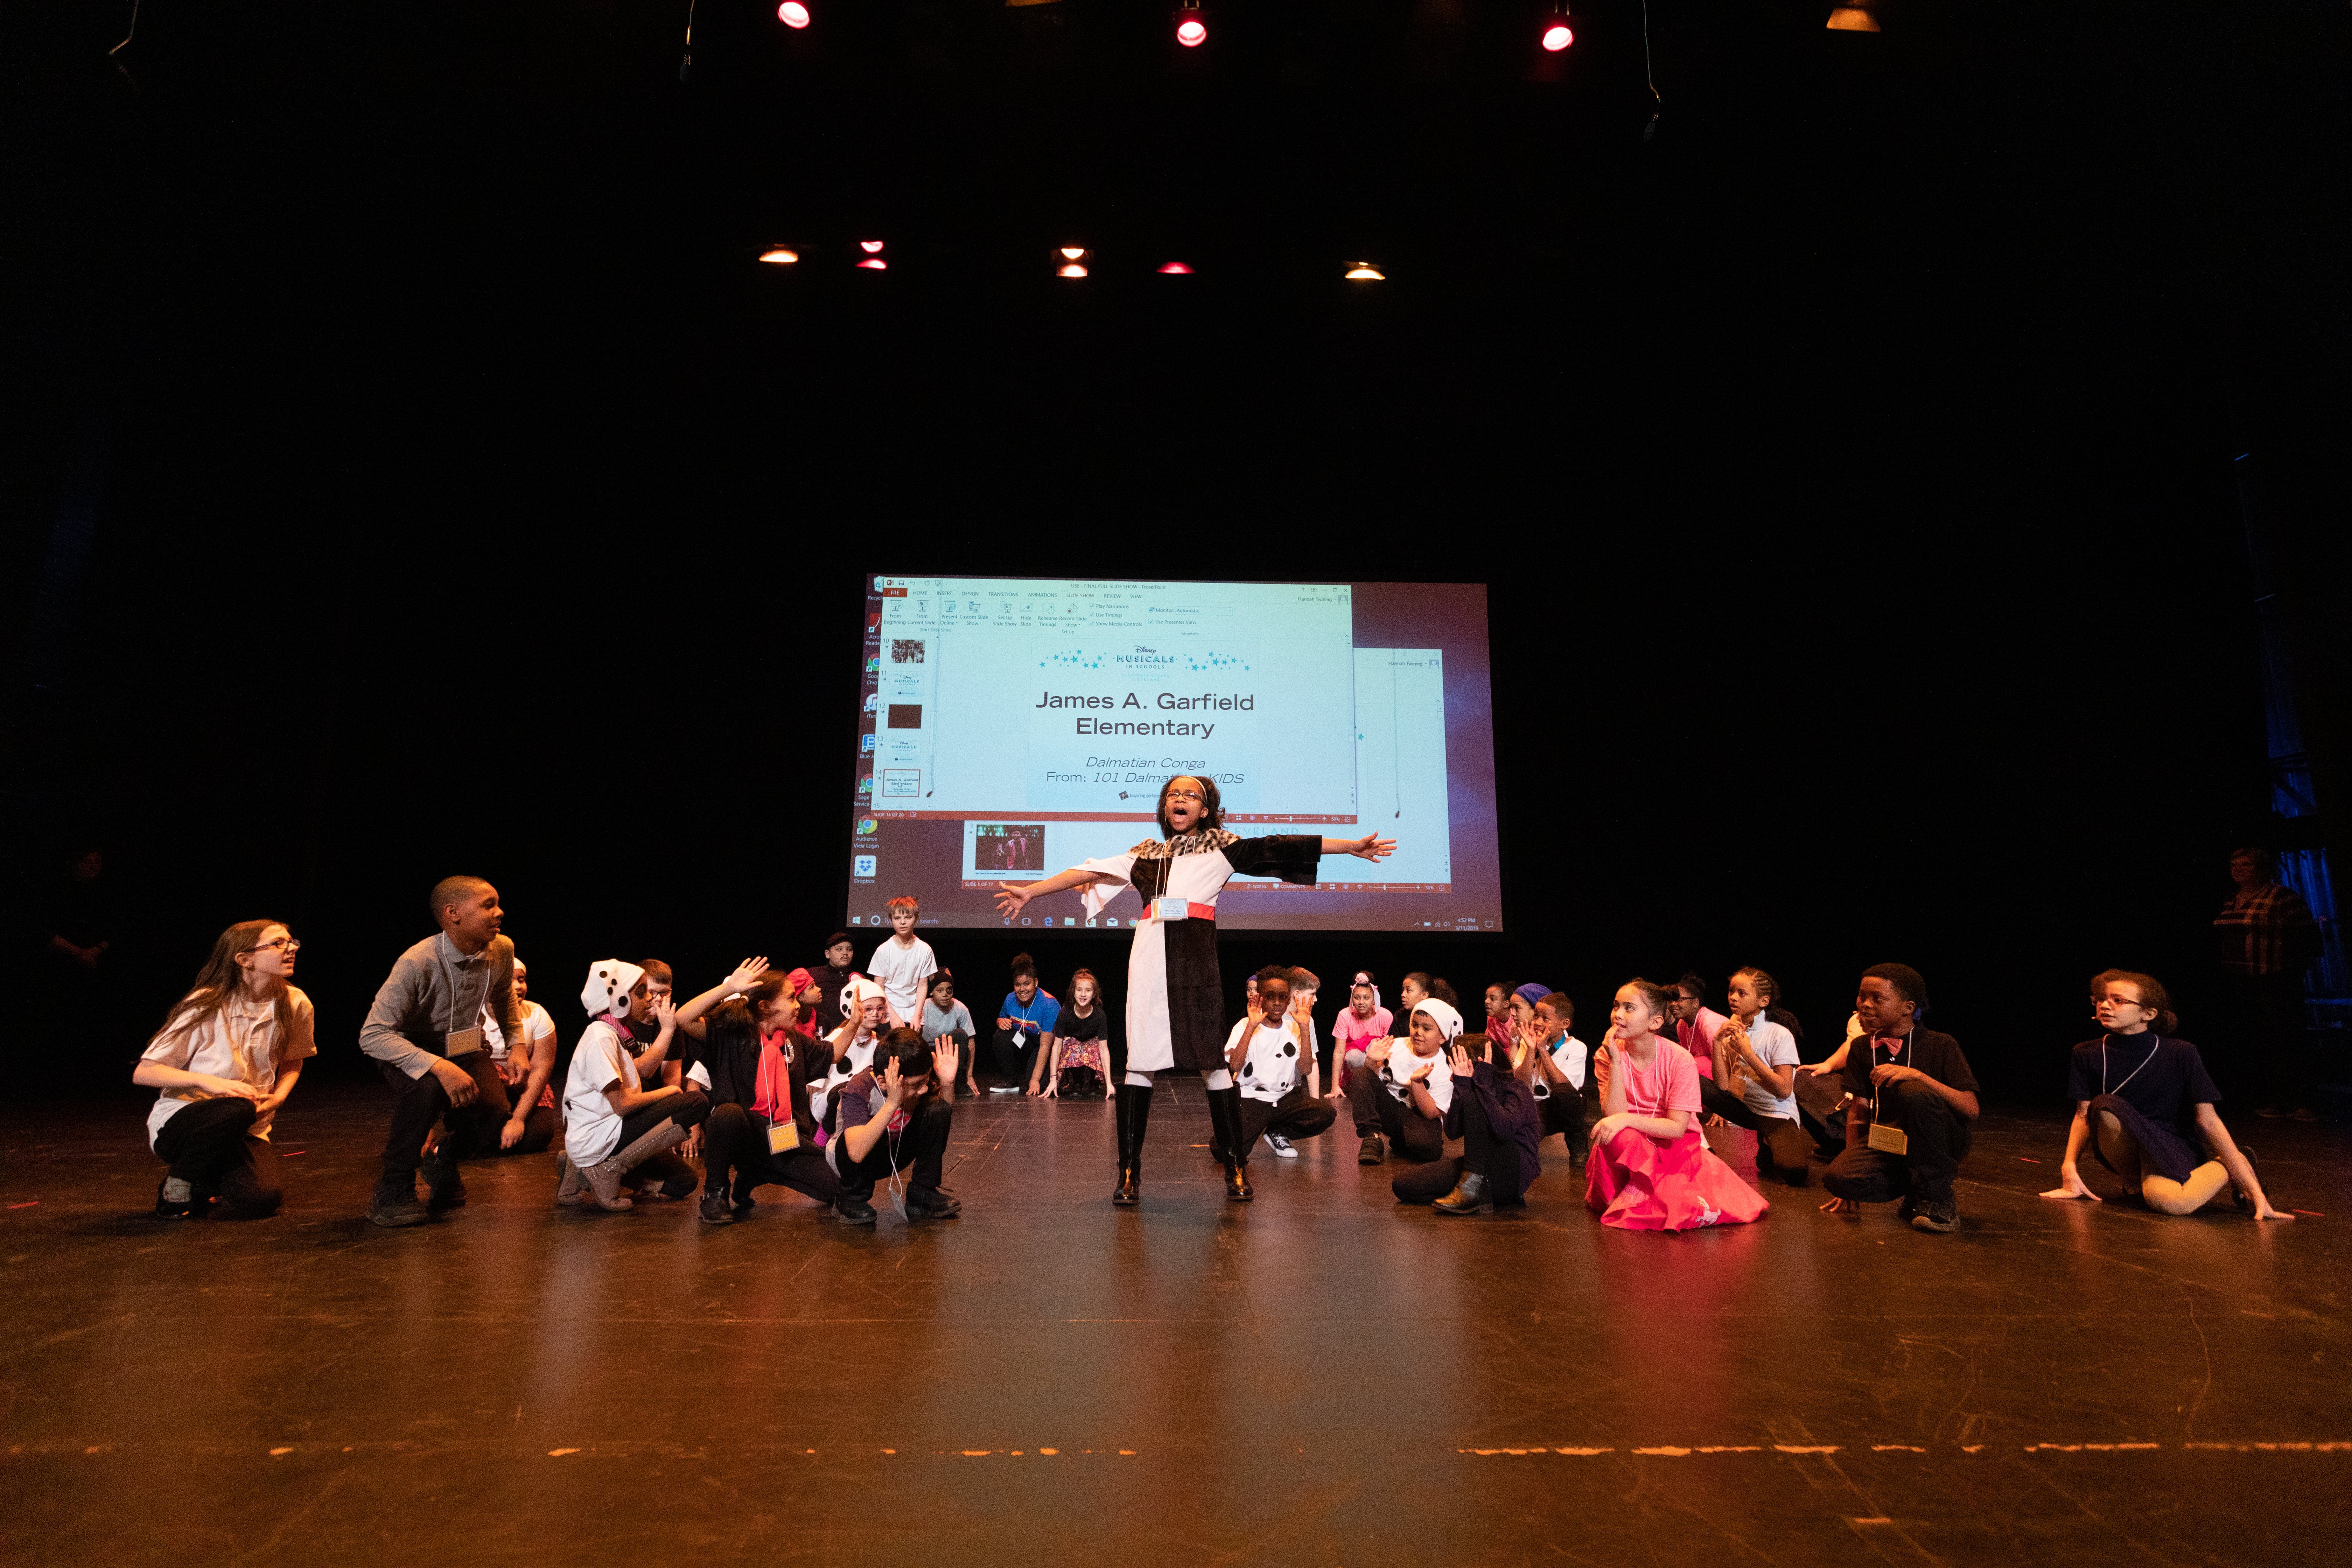 Playhouse Square Disney Musicals Student Shares-James A Garfield Elementary Group.jpg